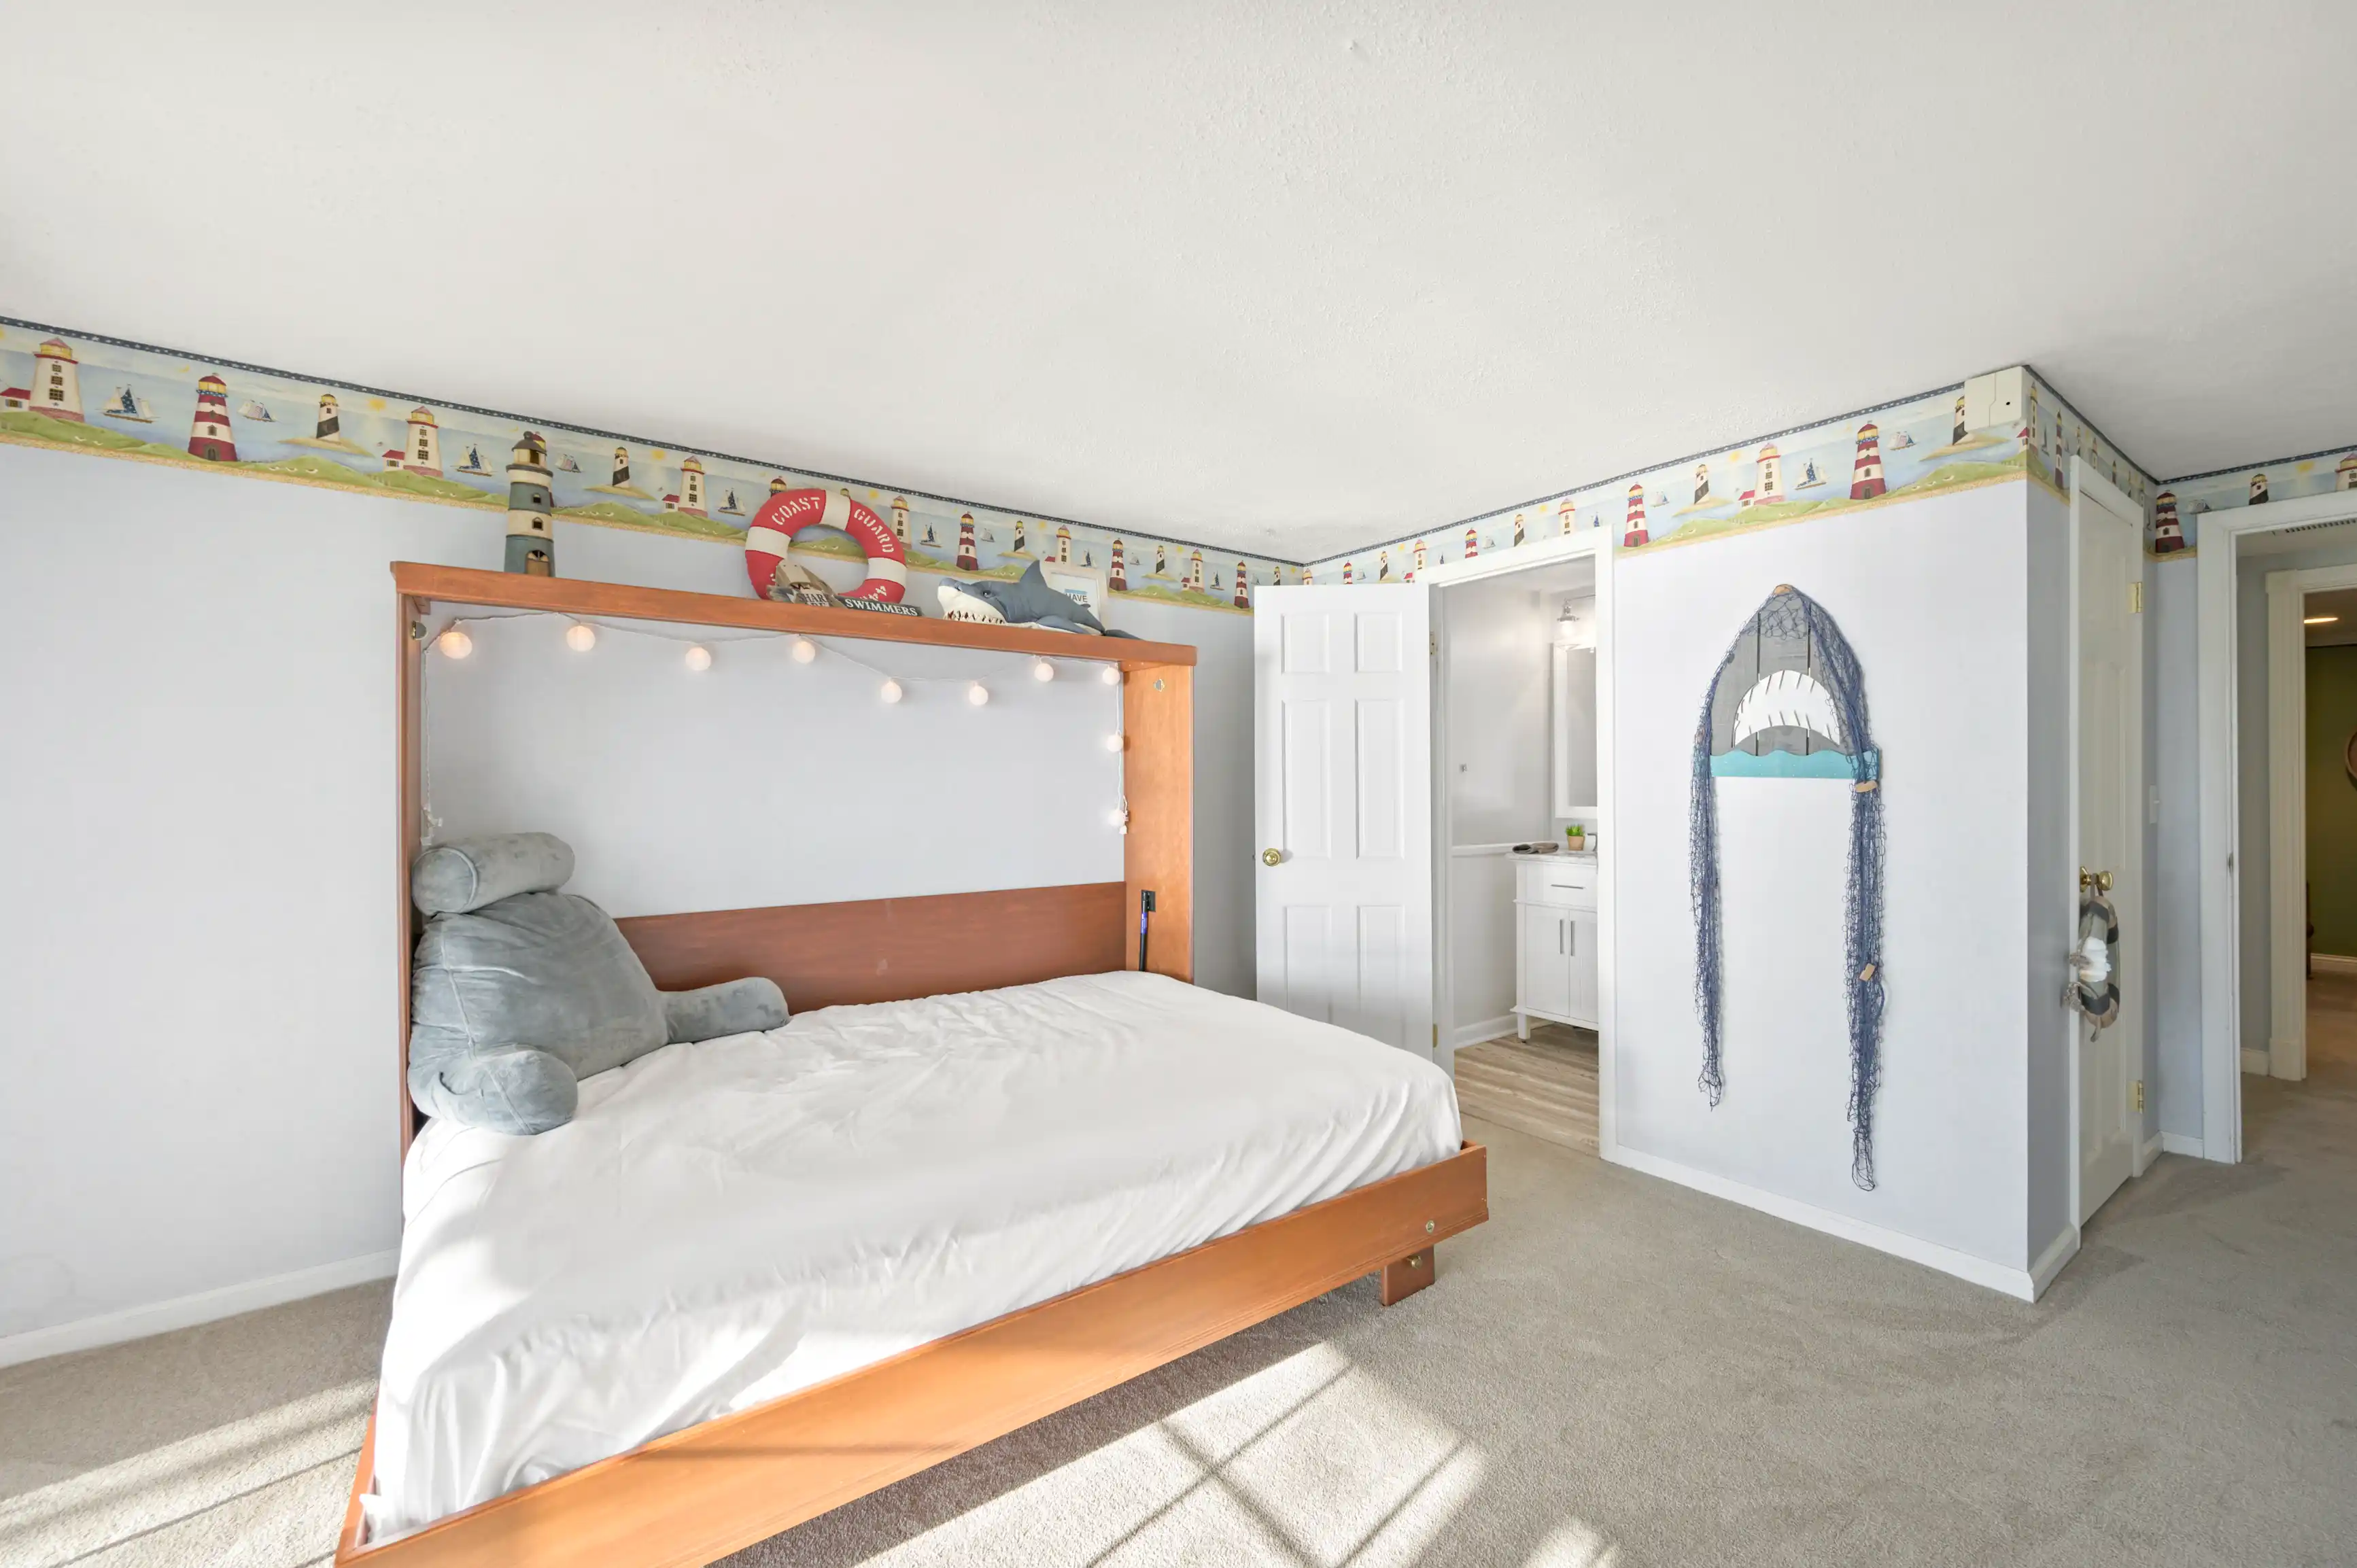 Bright and airy bedroom with a nautical theme, featuring a bed with a wooden headboard adorned with string lights, plush manatee toy, lighthouse wallpaper border, and decorative shark silhouette on the closet door.